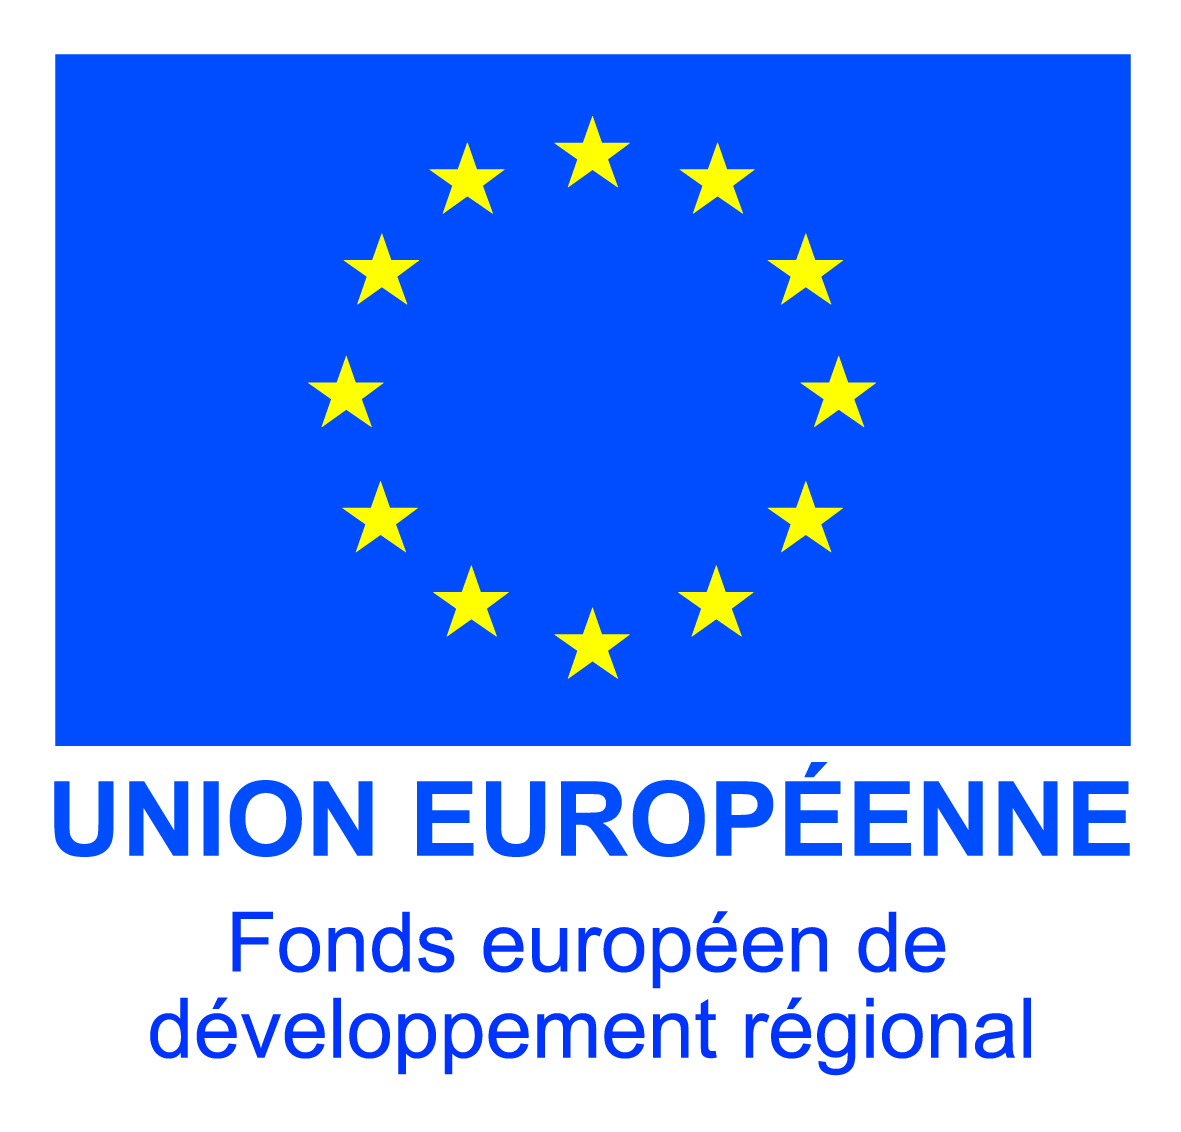 Funding from the normandie region and the european union towards sustainable development